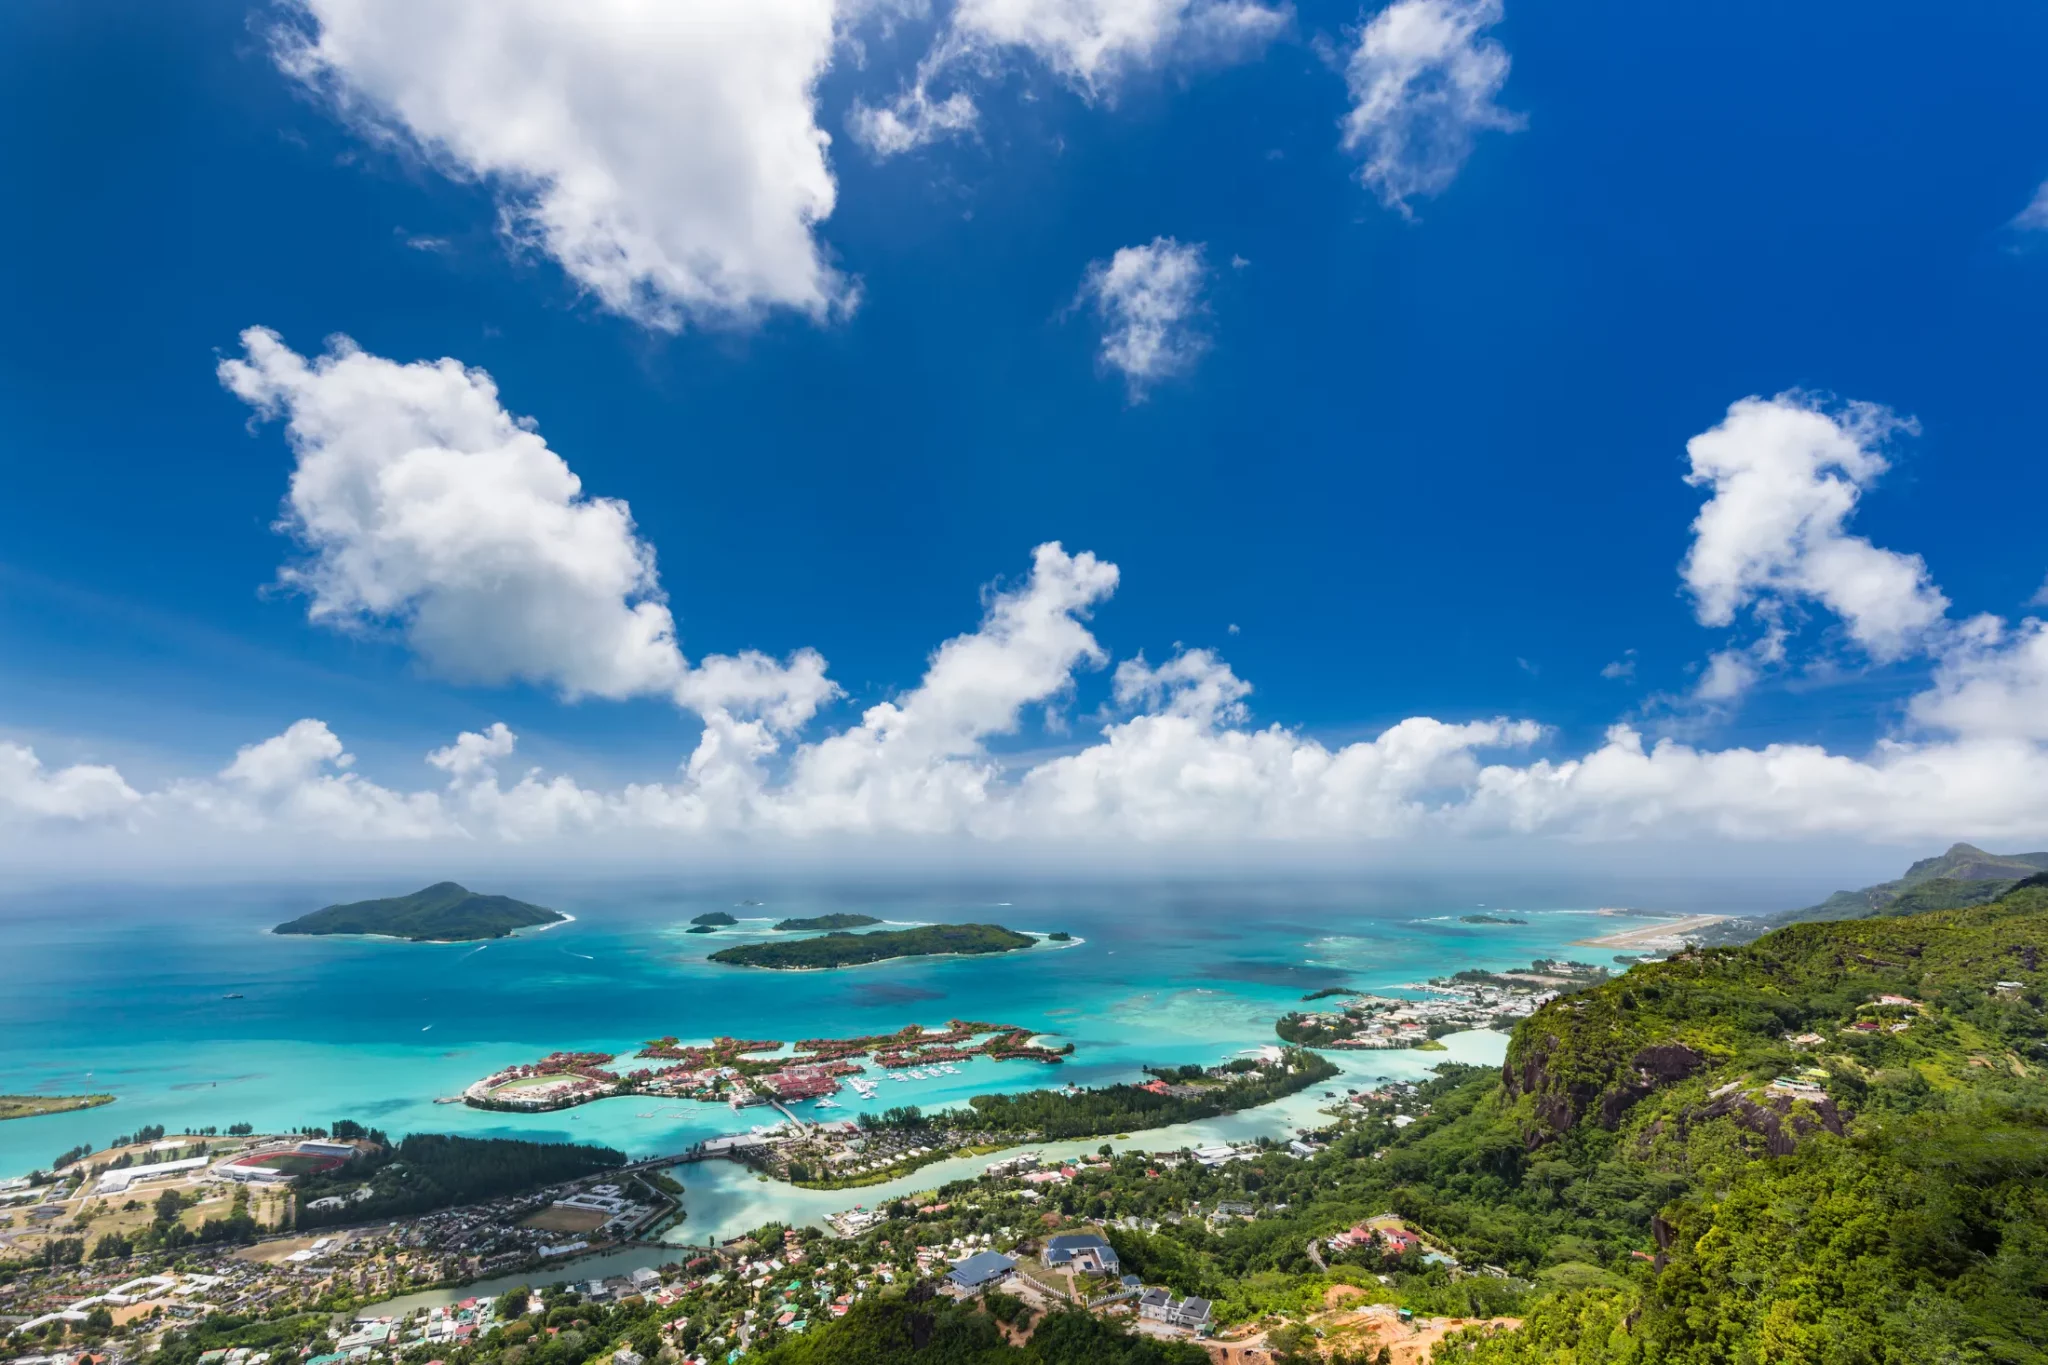 View of Mahe Seychelles with the capital Victoria in the foreground